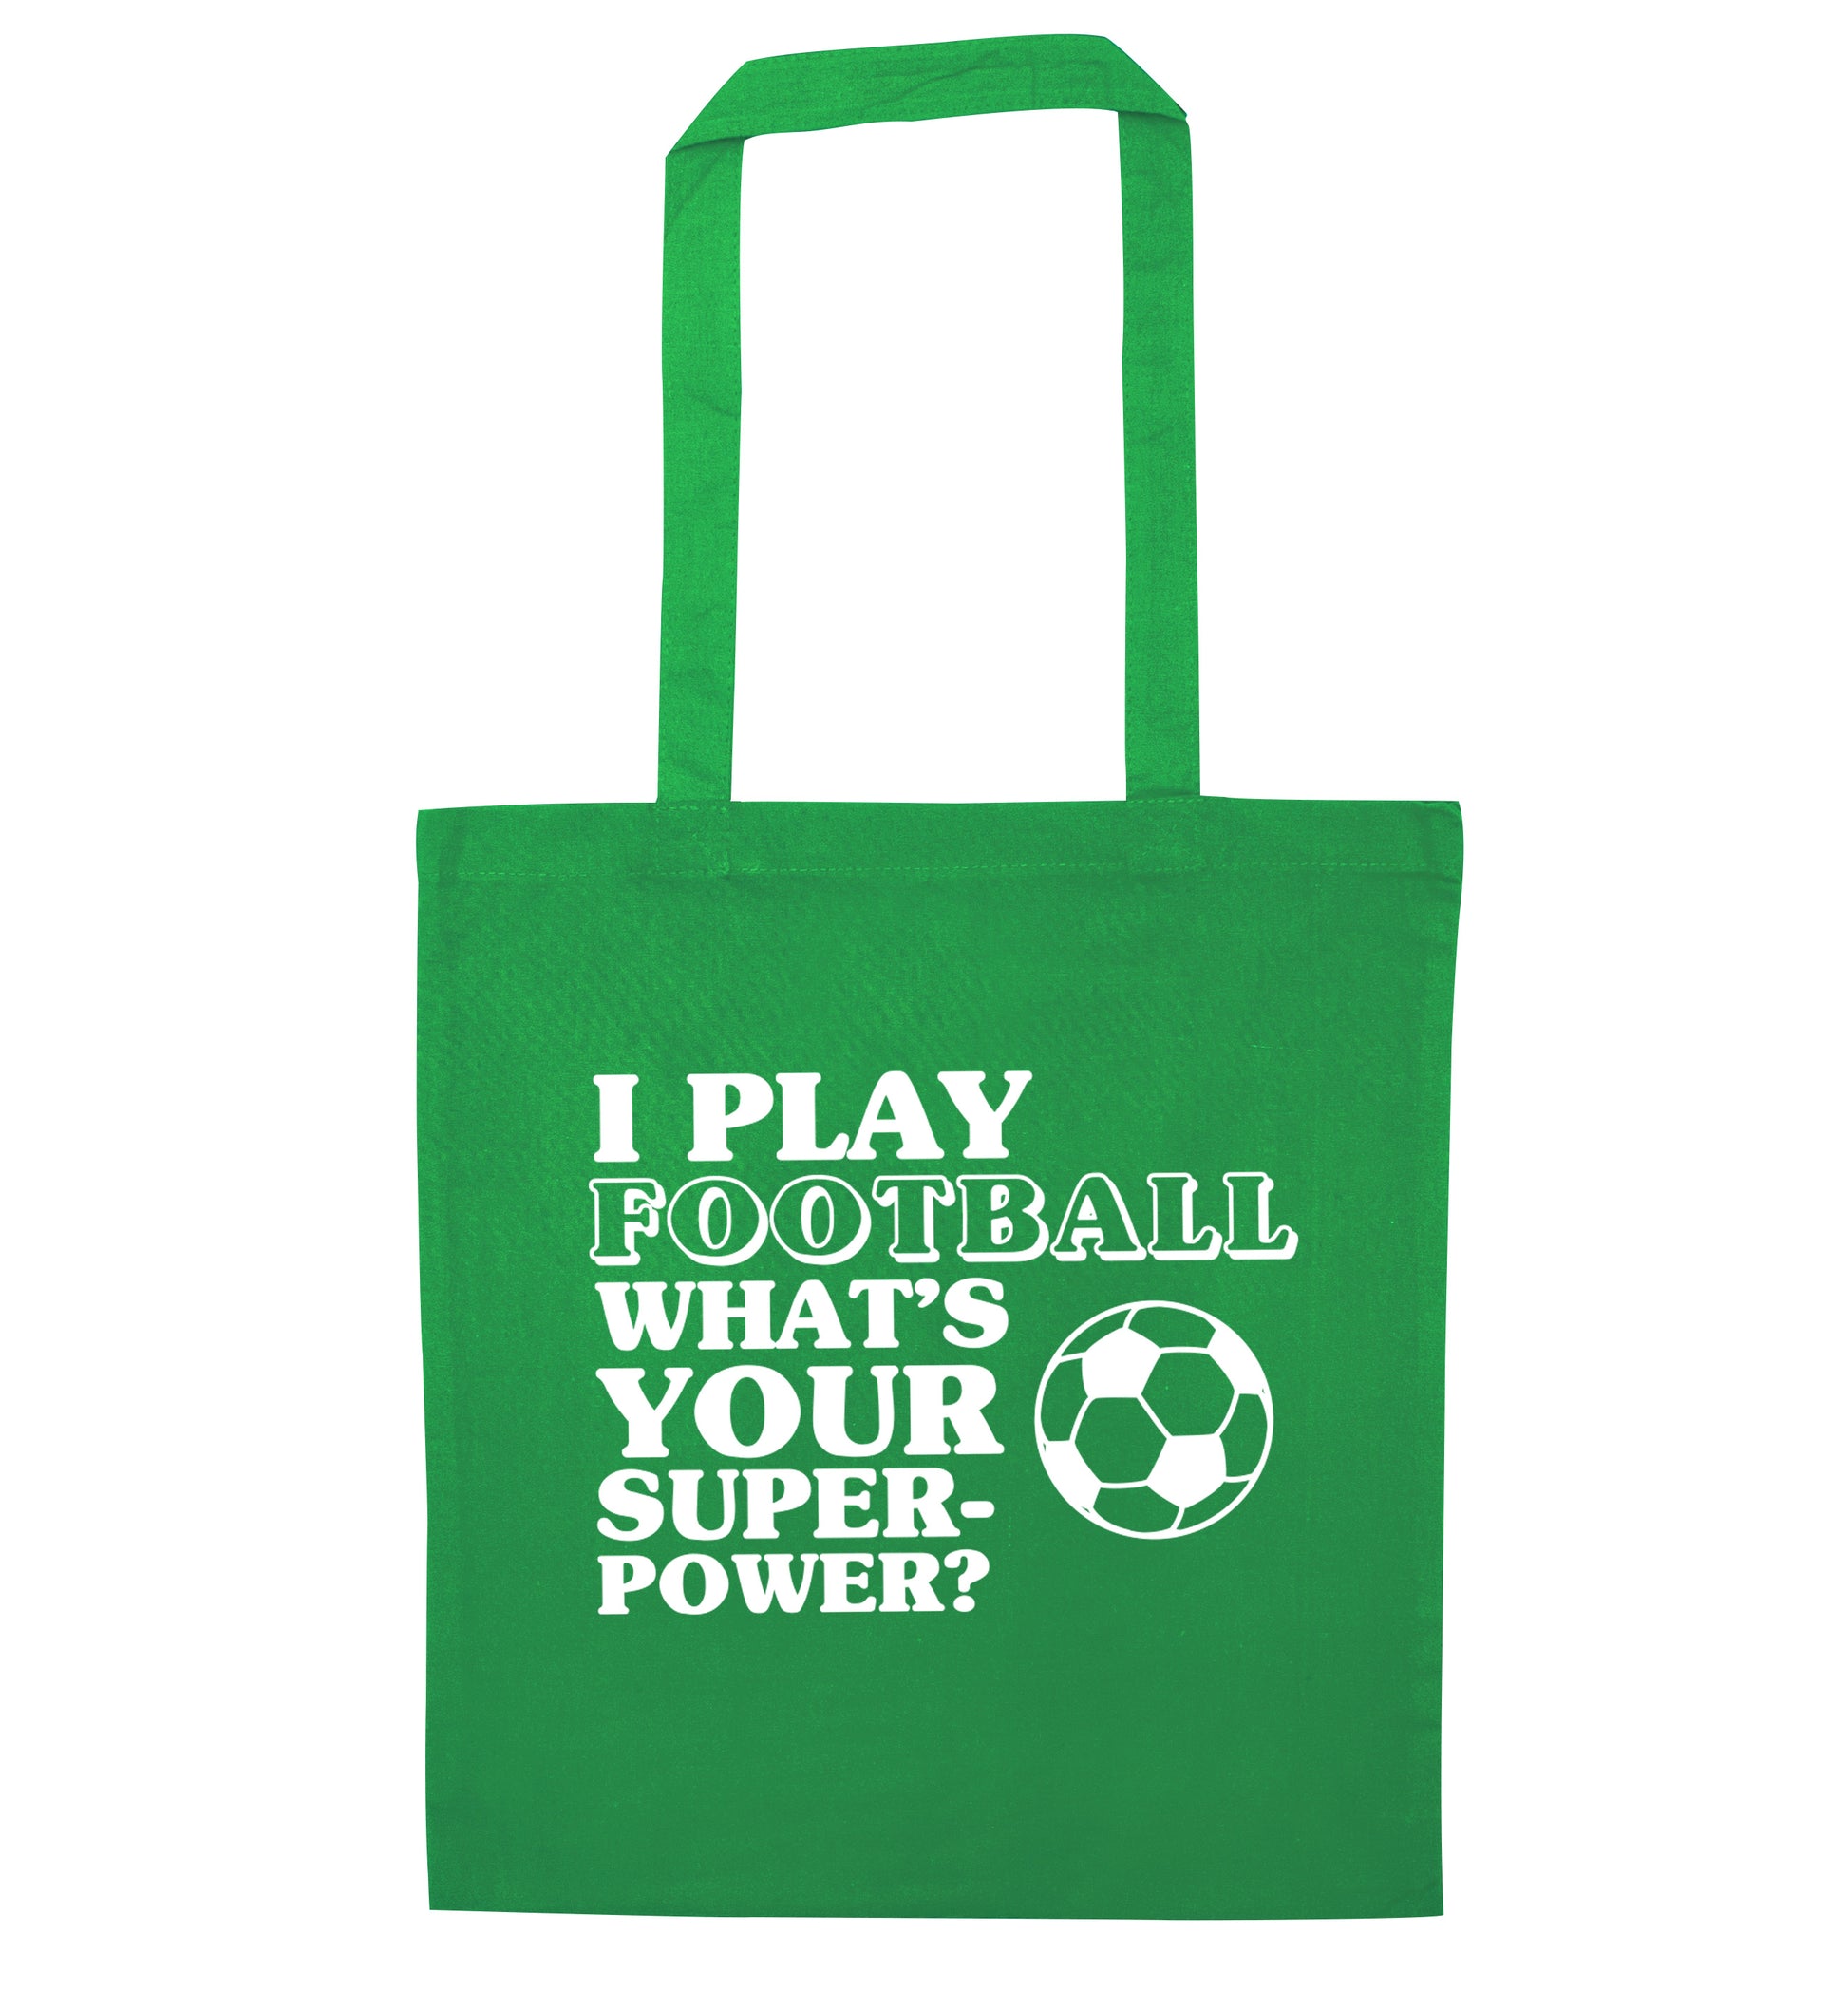 I play football what's your superpower? green tote bag